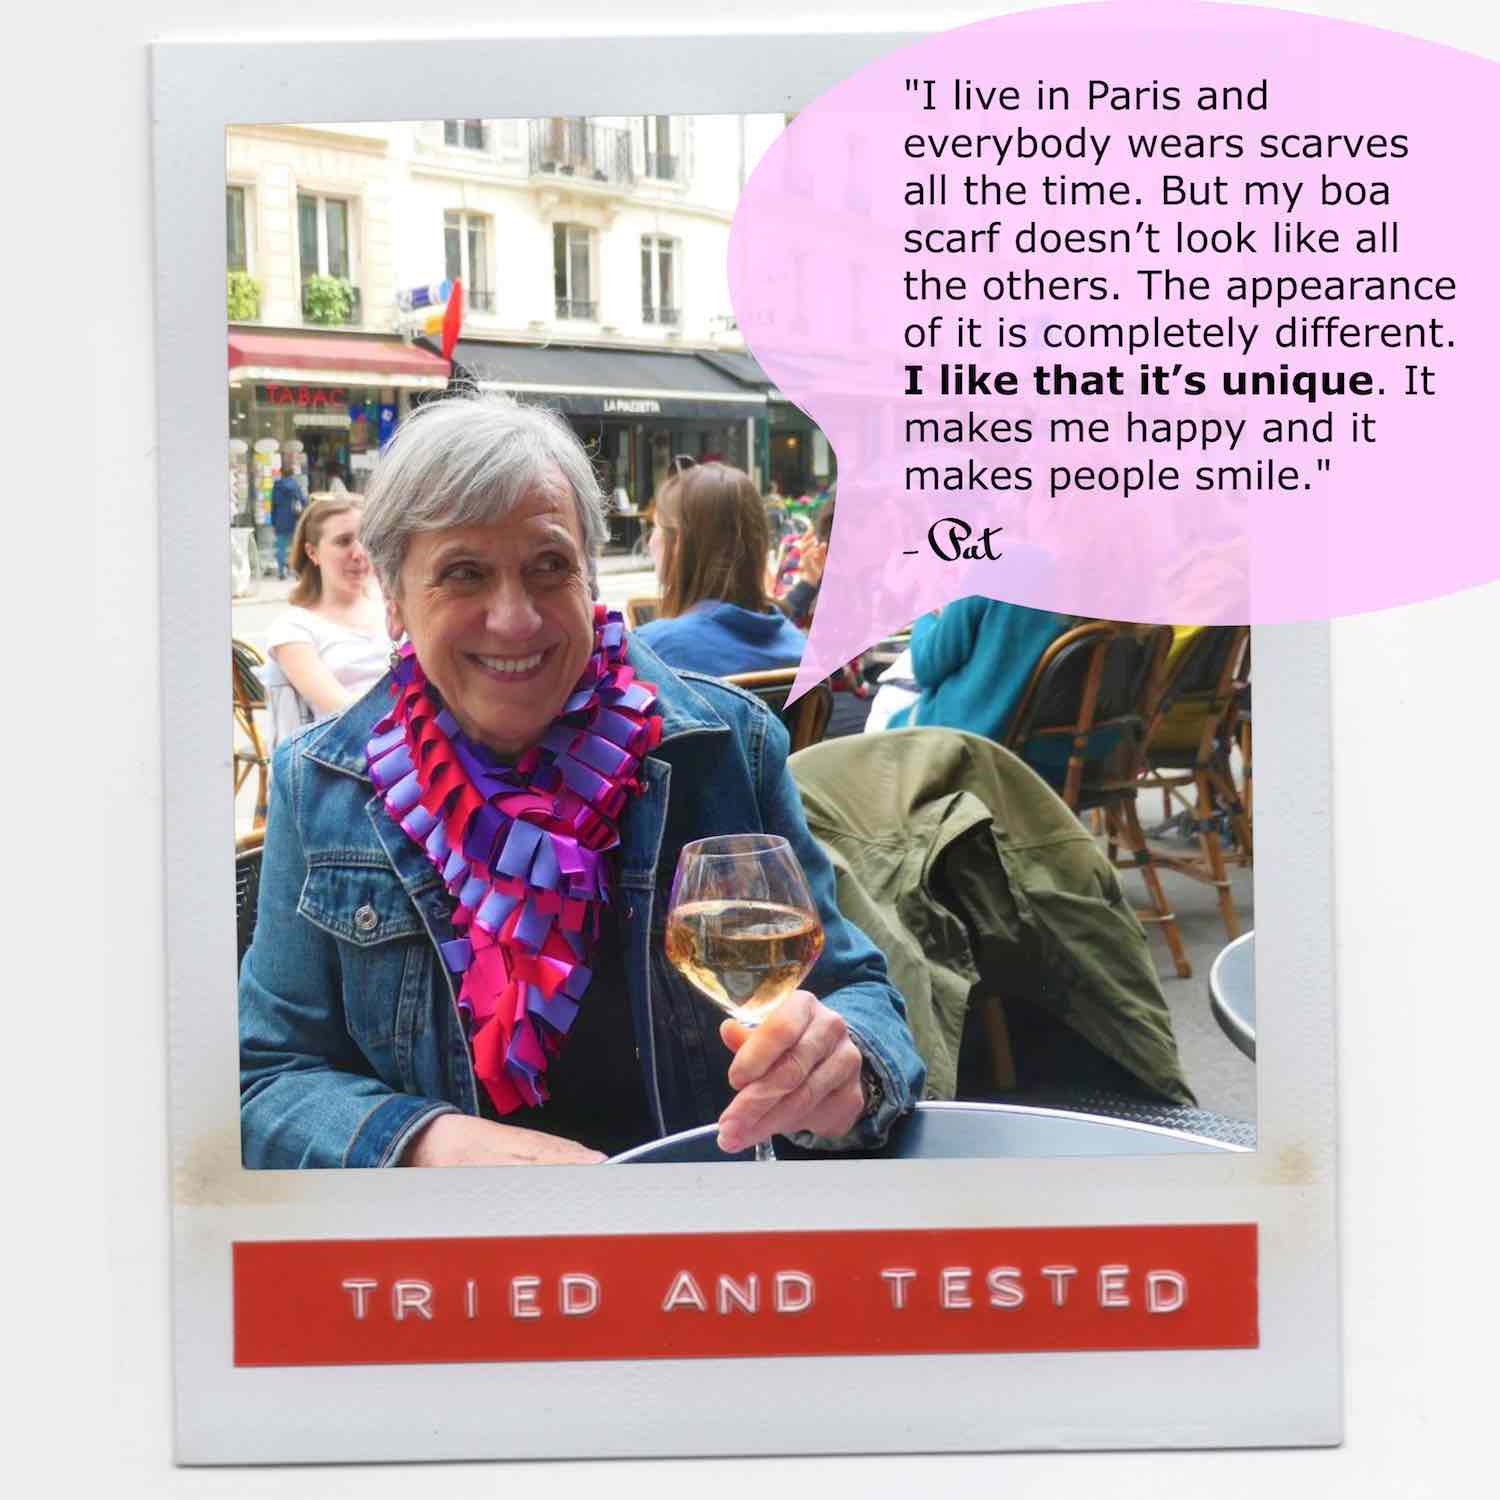 Pat smiling and wearing her multicolor fashion boa scarf with style while having a glass of wine in a Paris cafe.